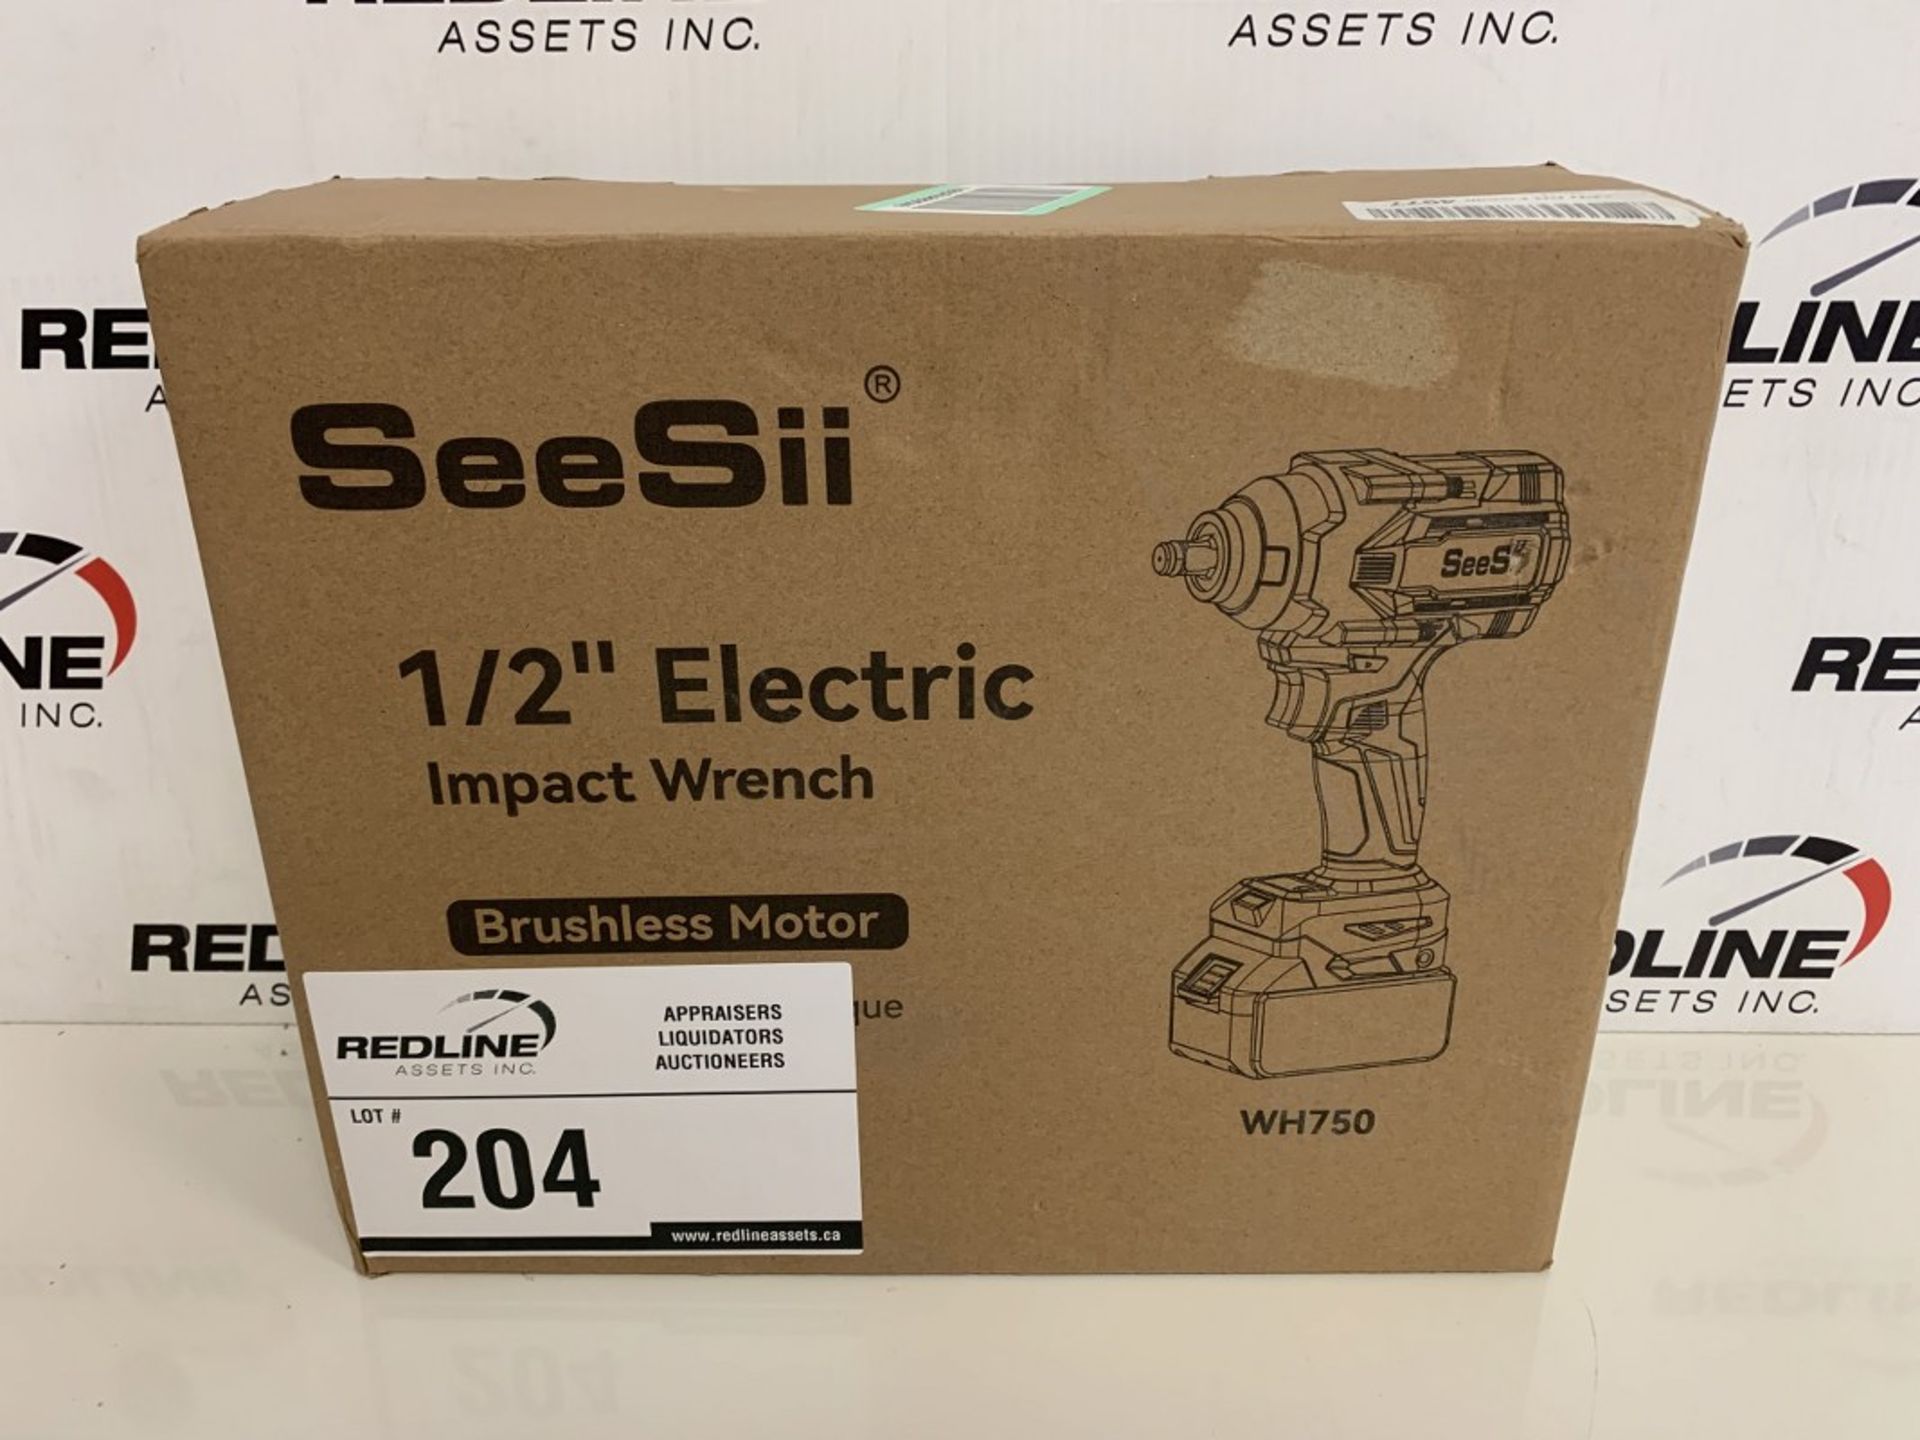 Seesii - 1/2" Electric Impact Wrench